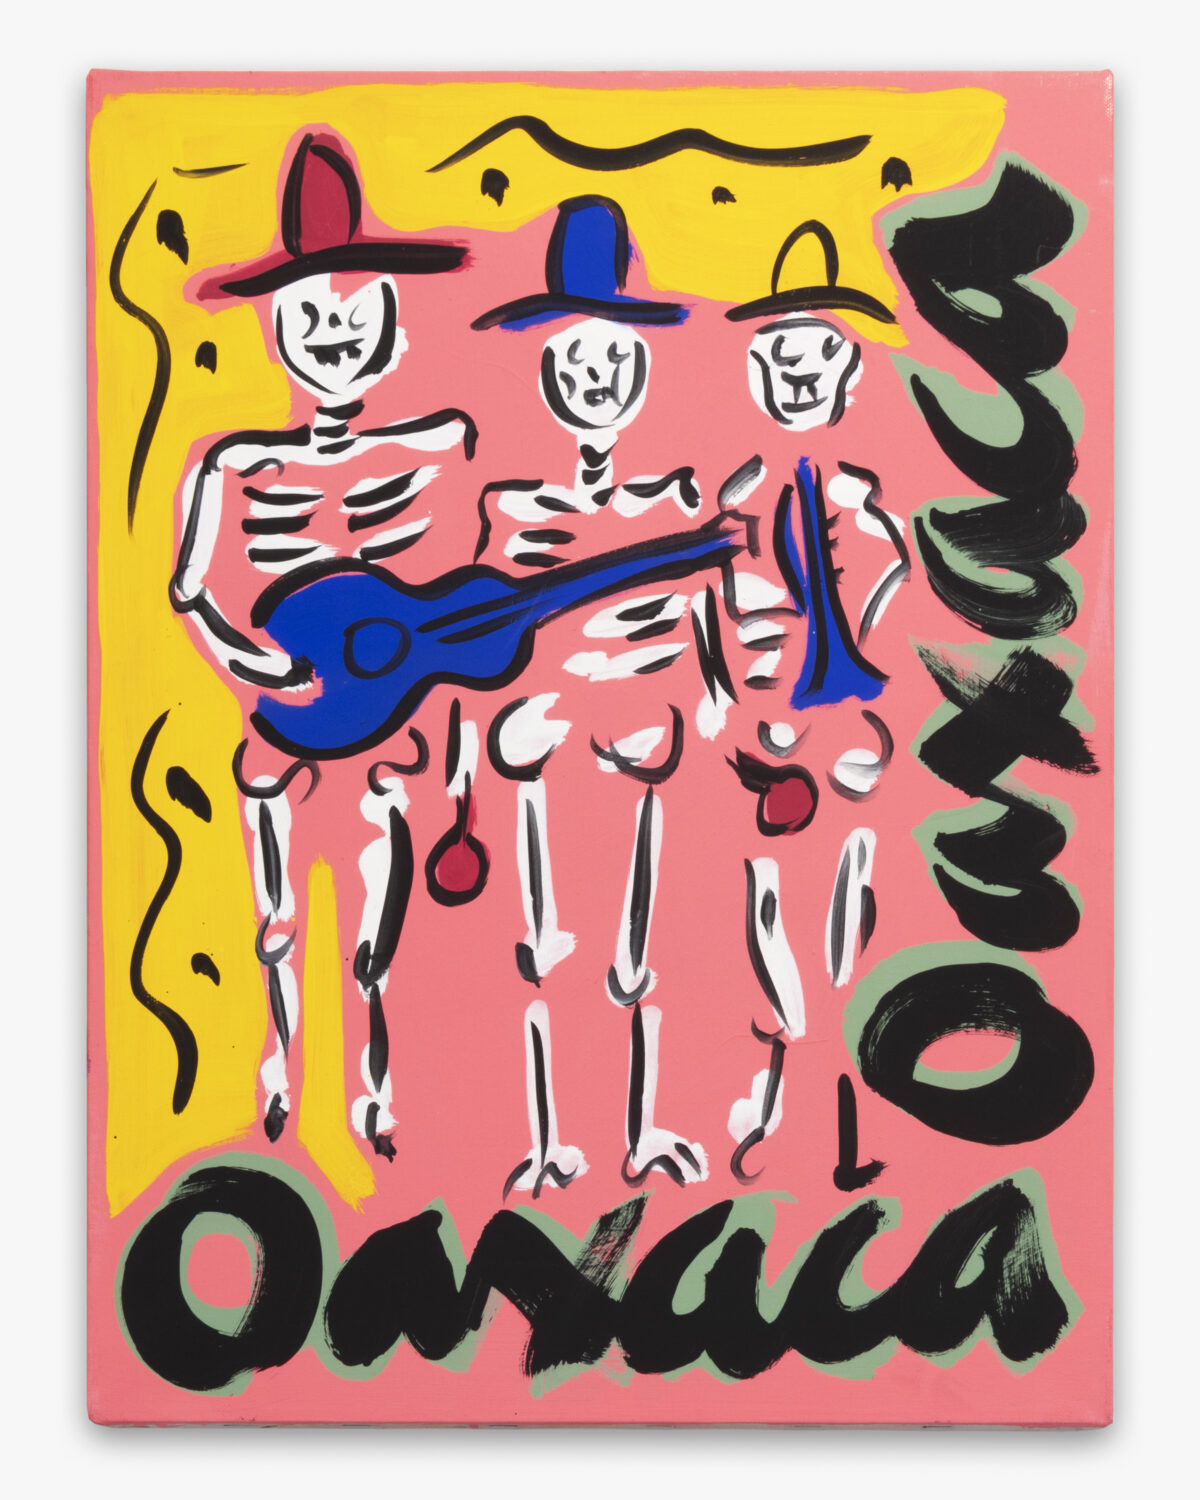 Three skeletons with hats and mariachi instruments. Text reads "Oaxaca." Background is yellow and pink.